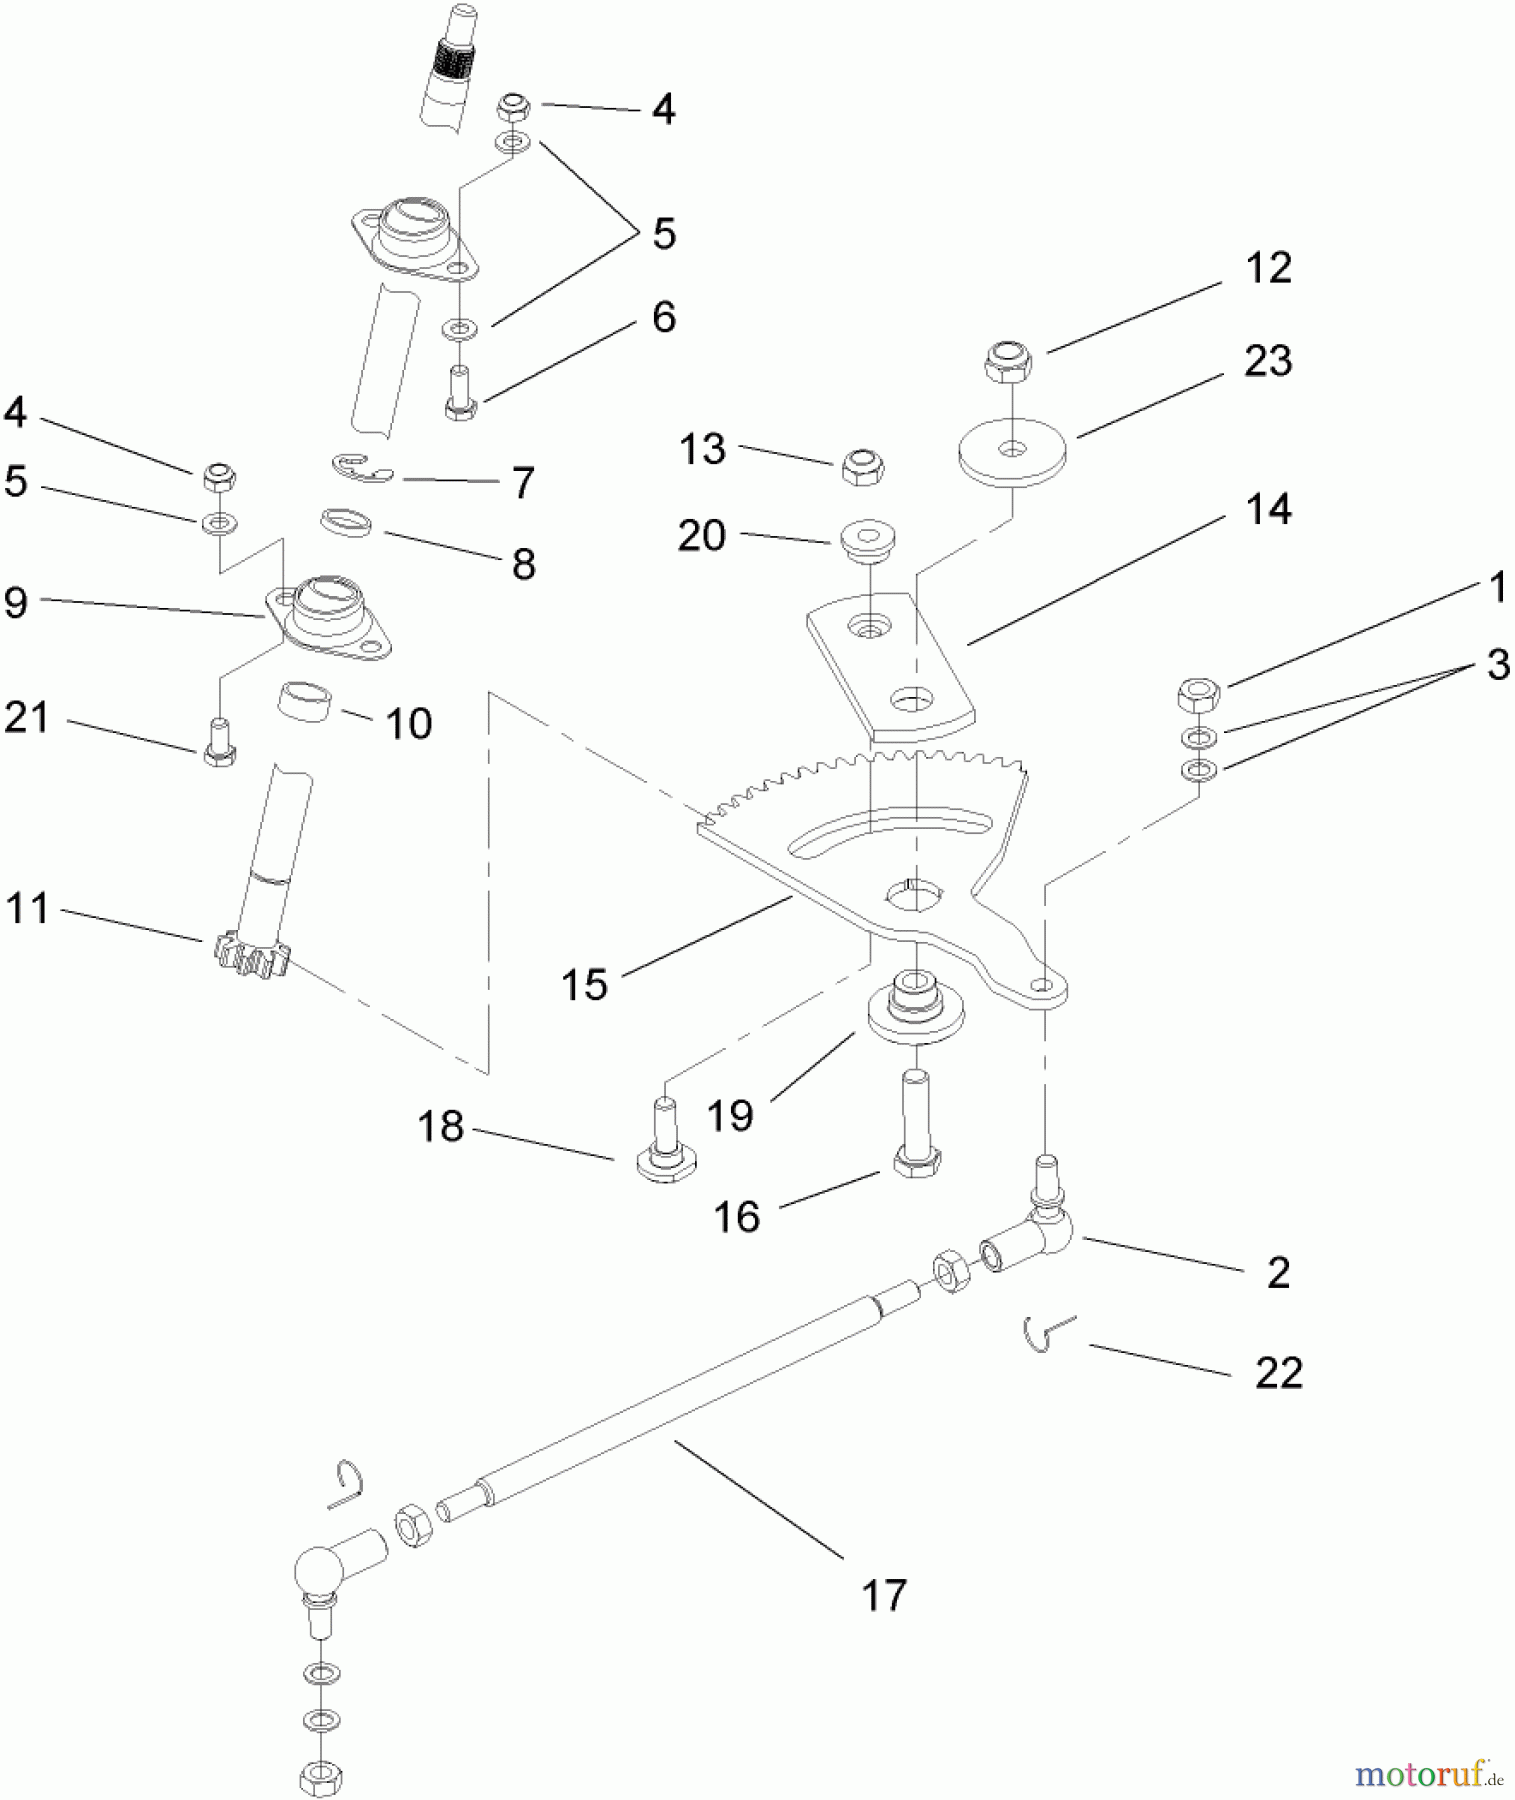  Toro Neu Mowers, Lawn & Garden Tractor Seite 1 74592 (DH 220) - Toro DH 220 Lawn Tractor, 2008 (280000529-280999999) STEERING ASSEMBLY